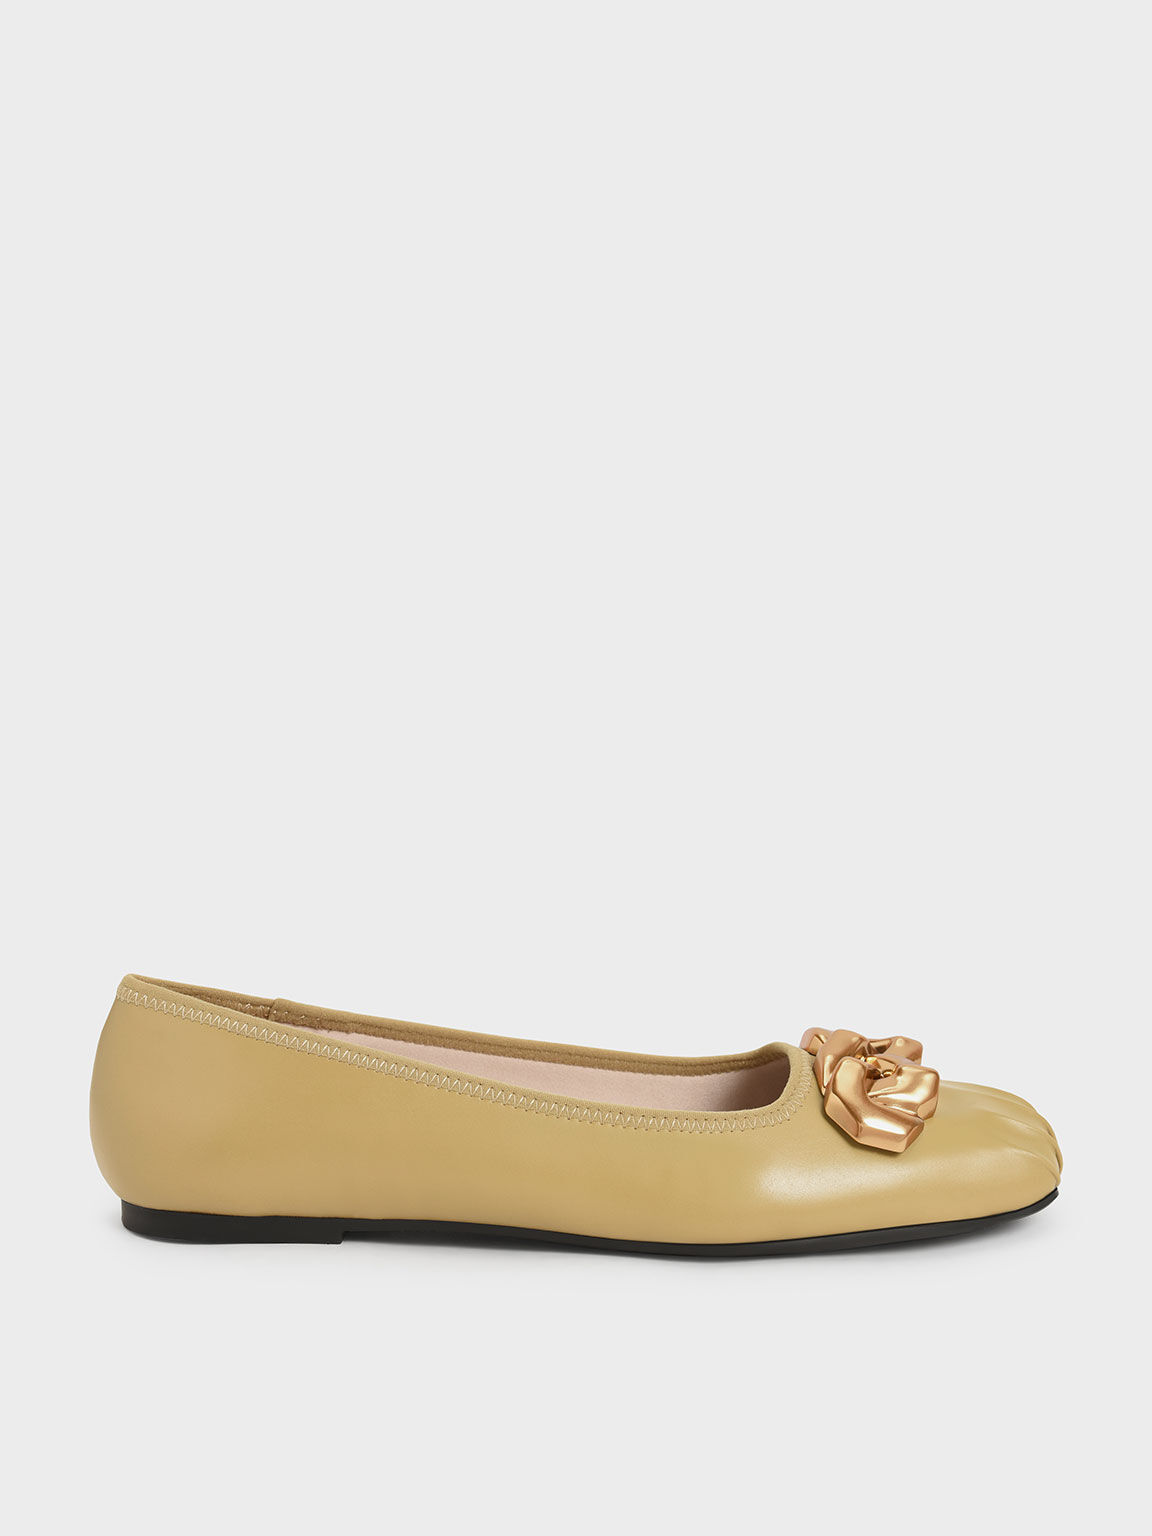 Ruched Square-Toe Chunky Chain-Link Ballerinas, Mustard, hi-res